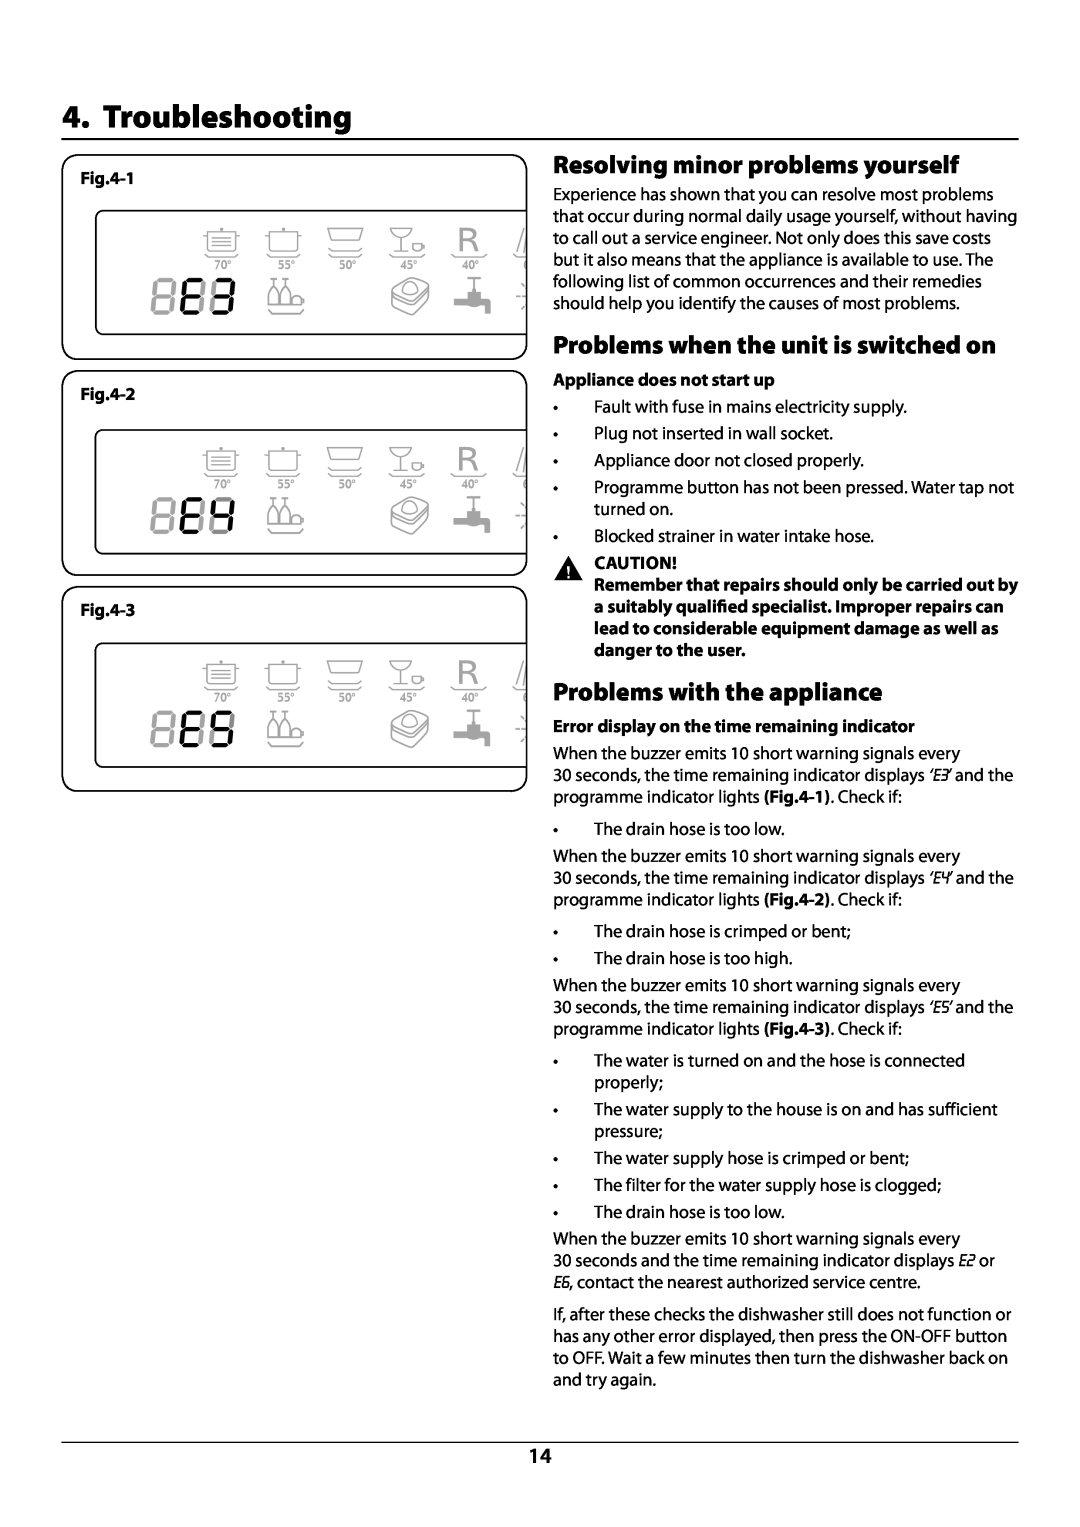 Rangemaster RDW459FI/SF Troubleshooting, Resolving minor problems yourself, Problems when the unit is switched on, 1 -2 -3 